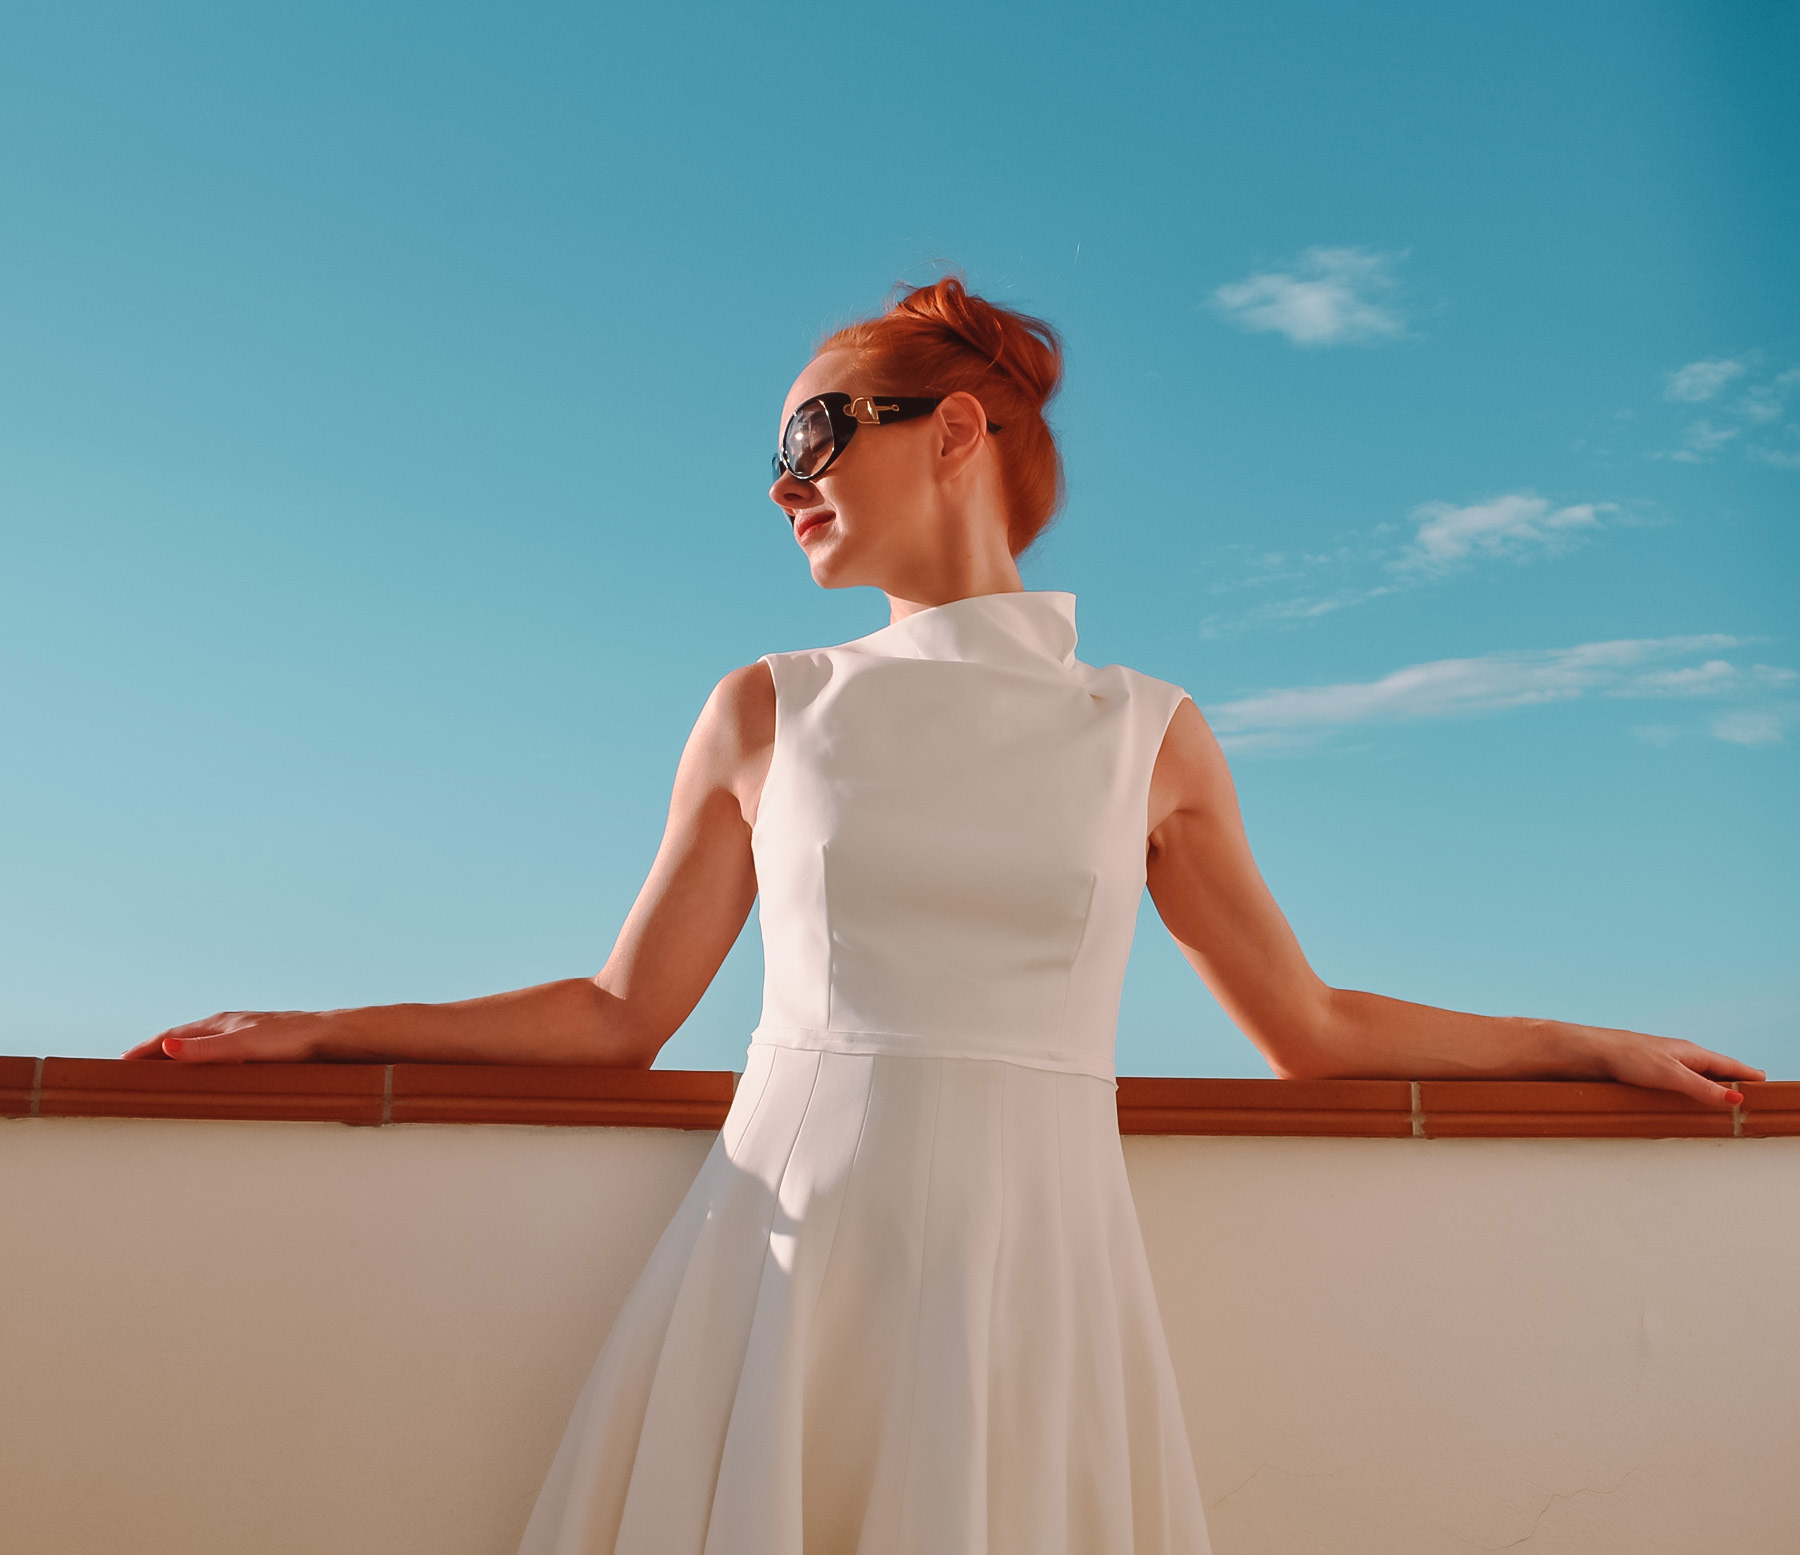 Amber wears a white, high-necked mini dress with a full skirt as she stands on the hotel balcony in the late evening sun